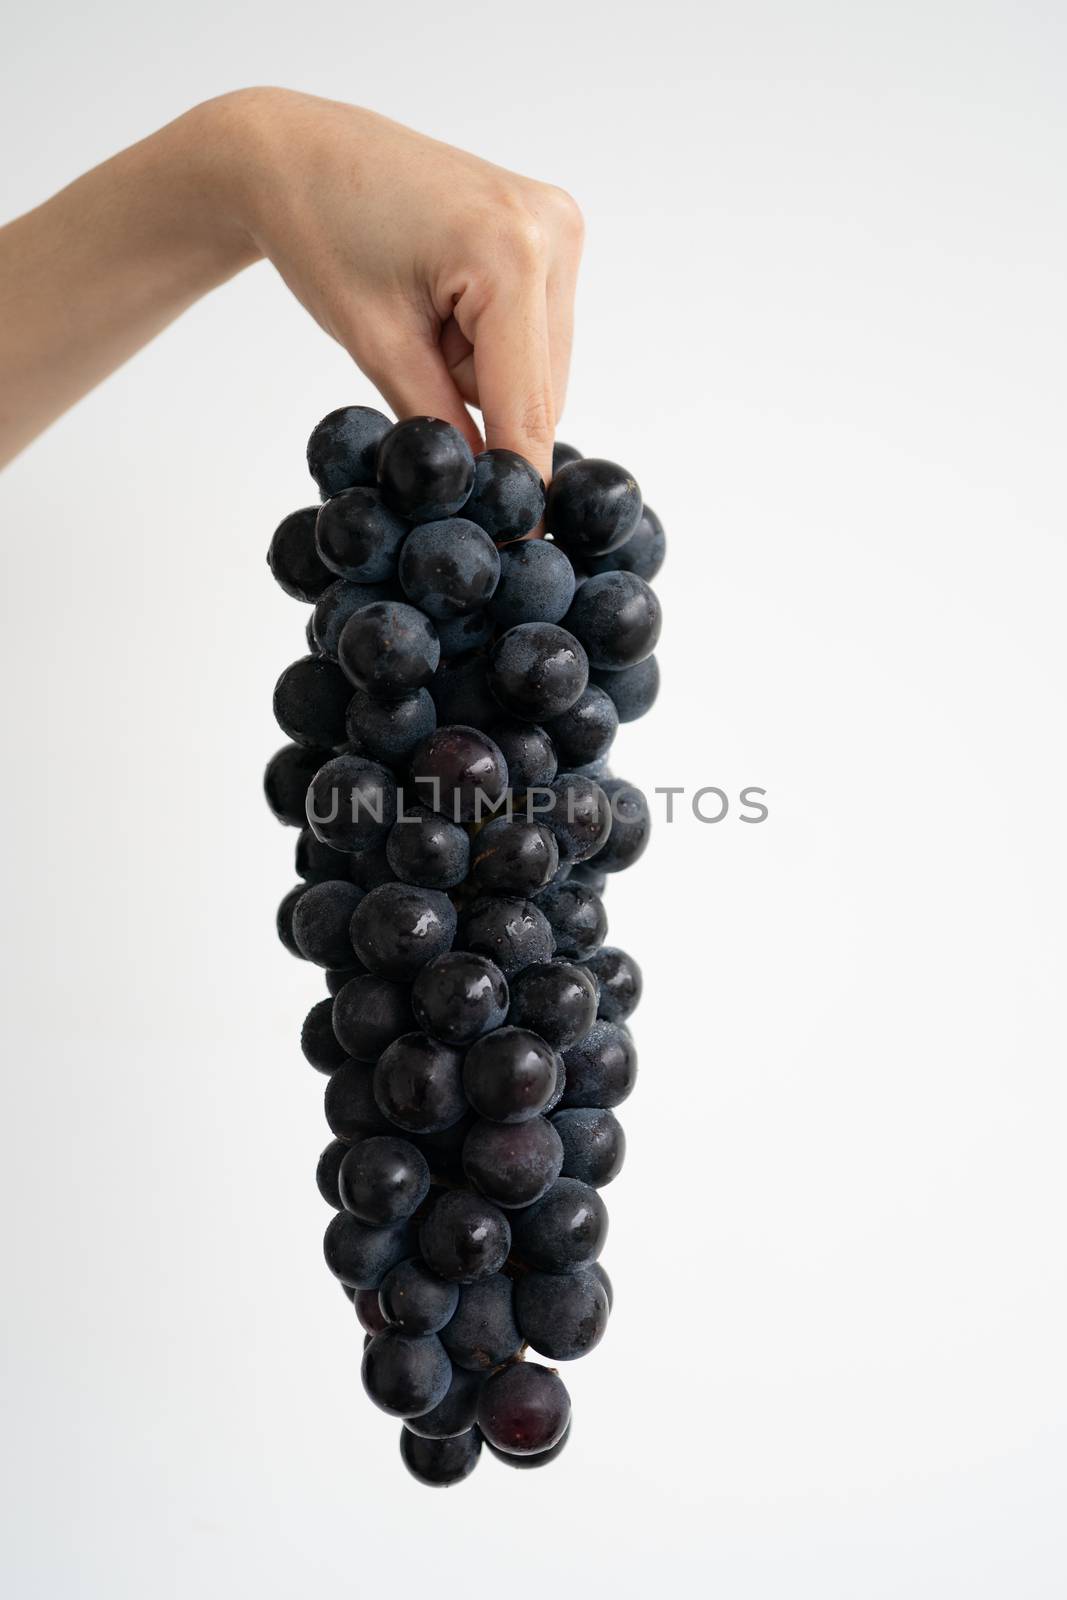 Fresh bunch of purple black grapes on hand over white background. Kyoho Grape.